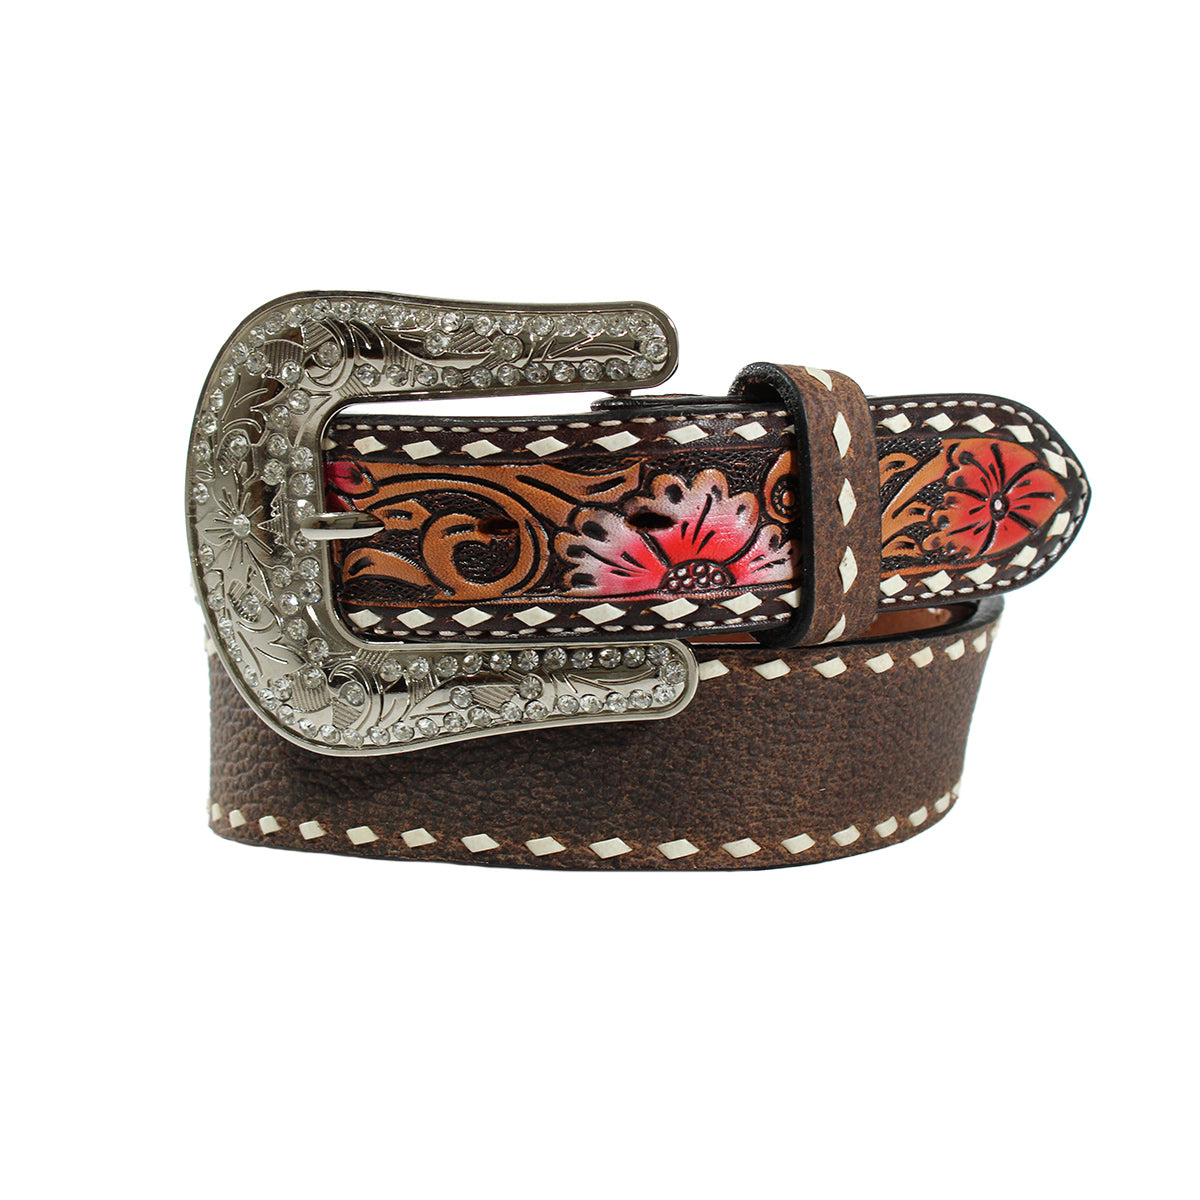 LADIES ANGEL RANCH BELT WITH HAND TOOLED ENDS